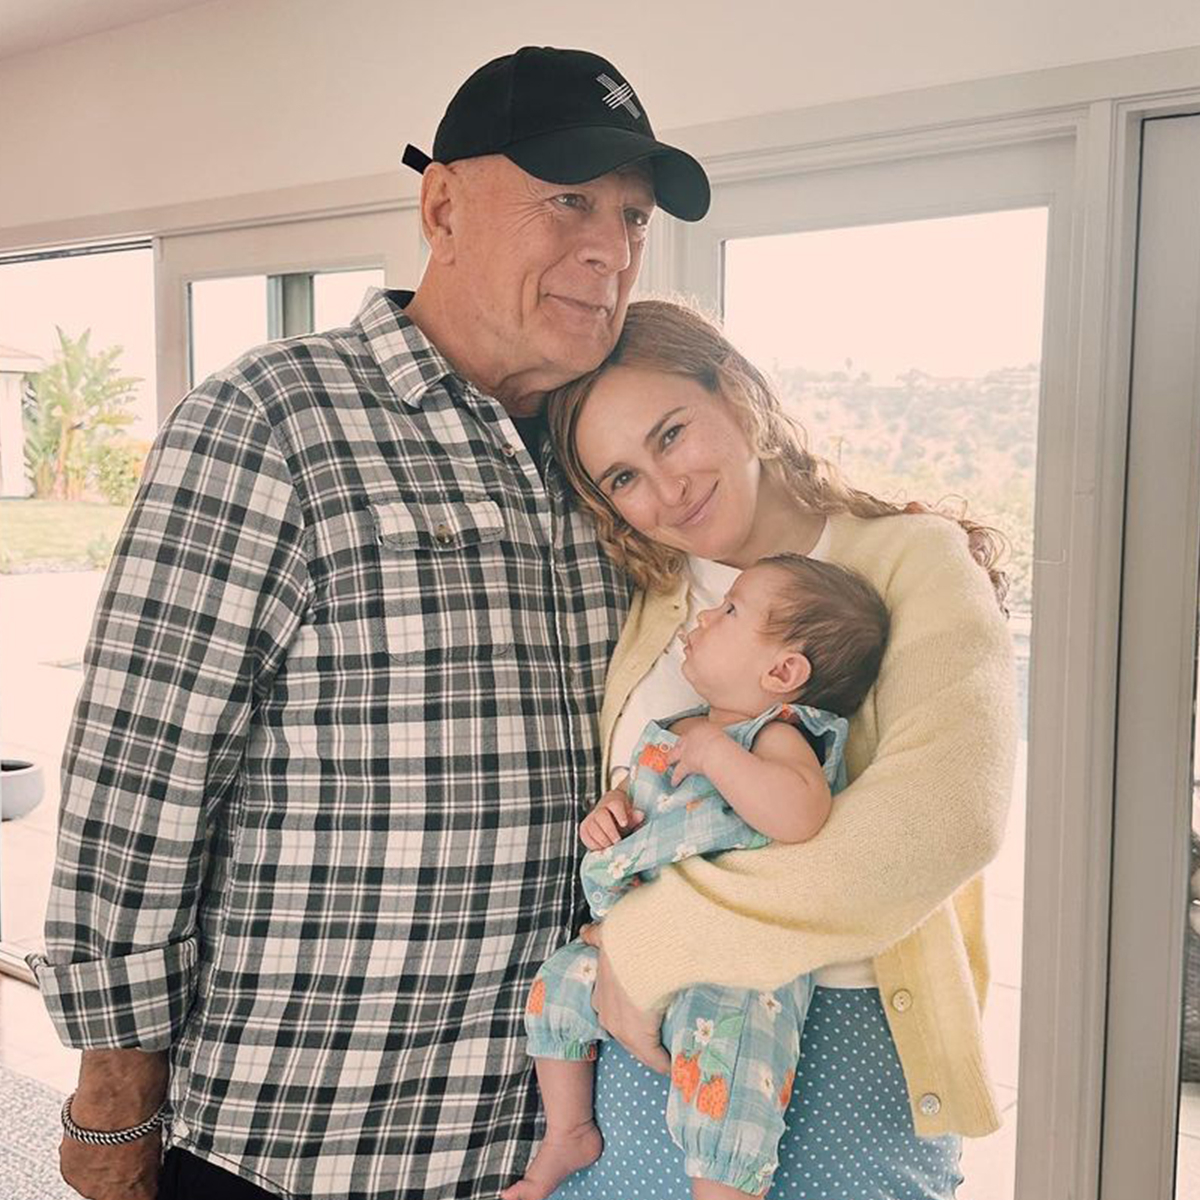 Rumer Willis Reveals Daughter’s Name Is a Tribute to Dad Bruce Willis